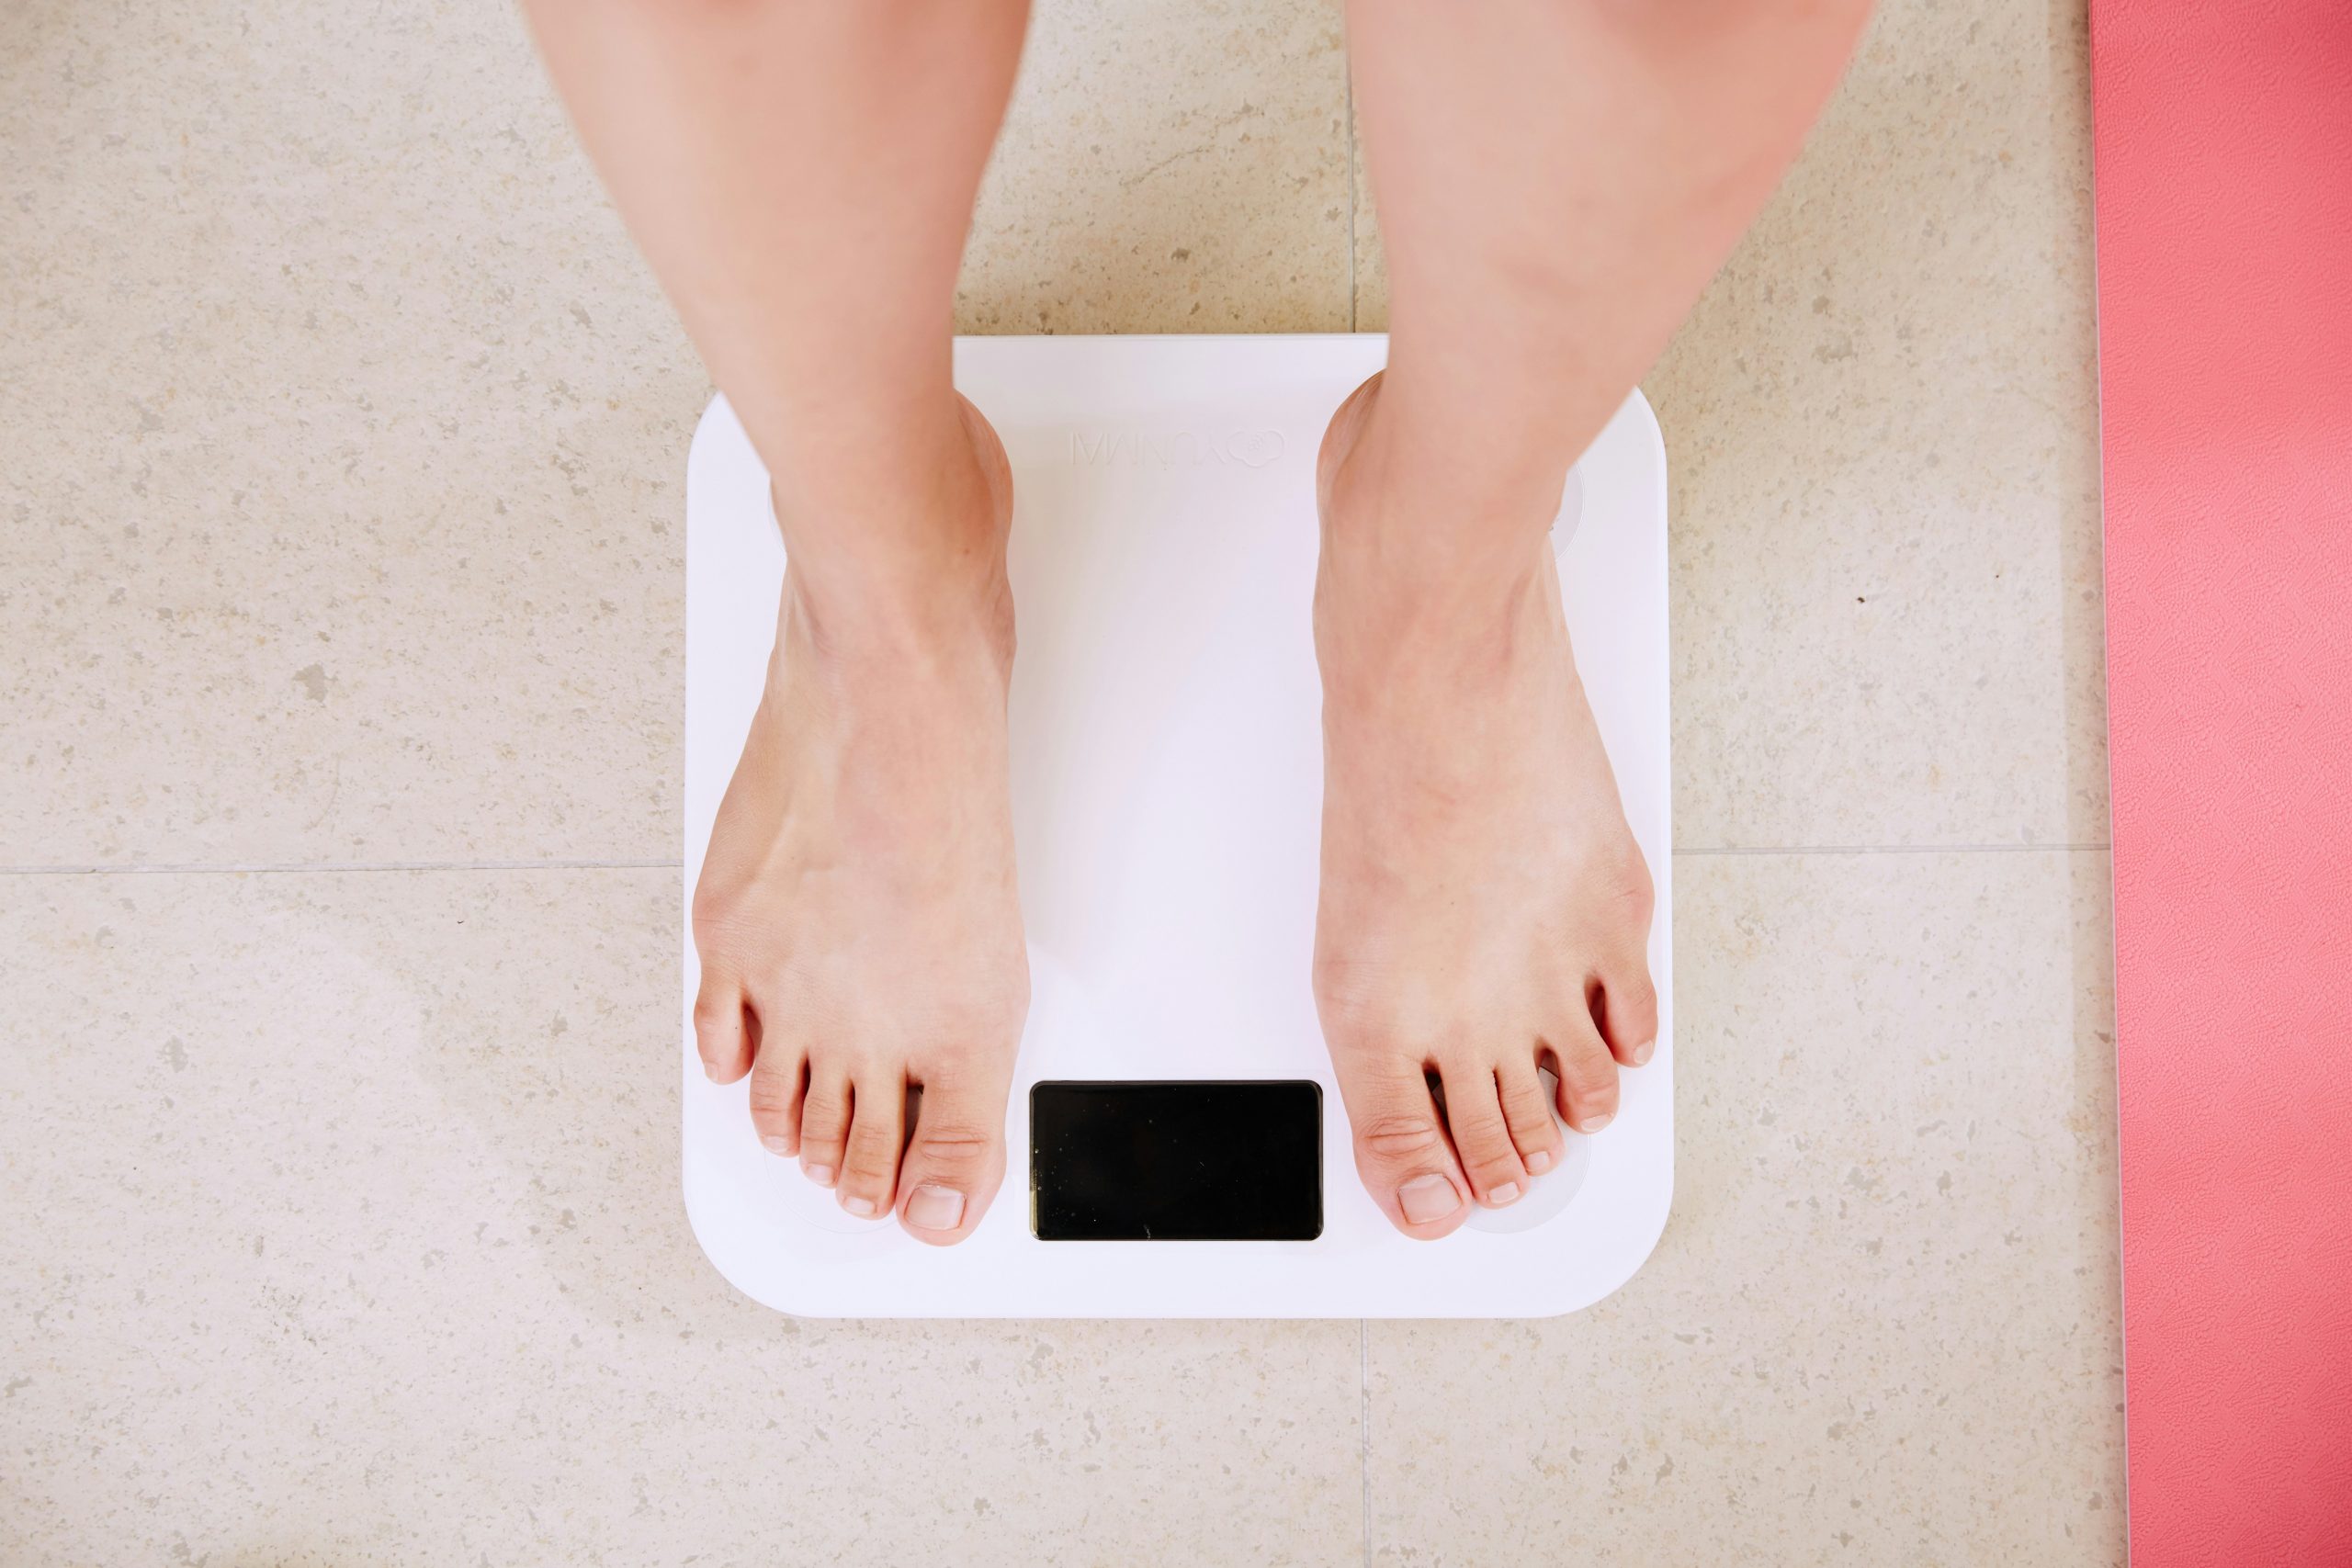 The two biggest weight loss mistakes I made